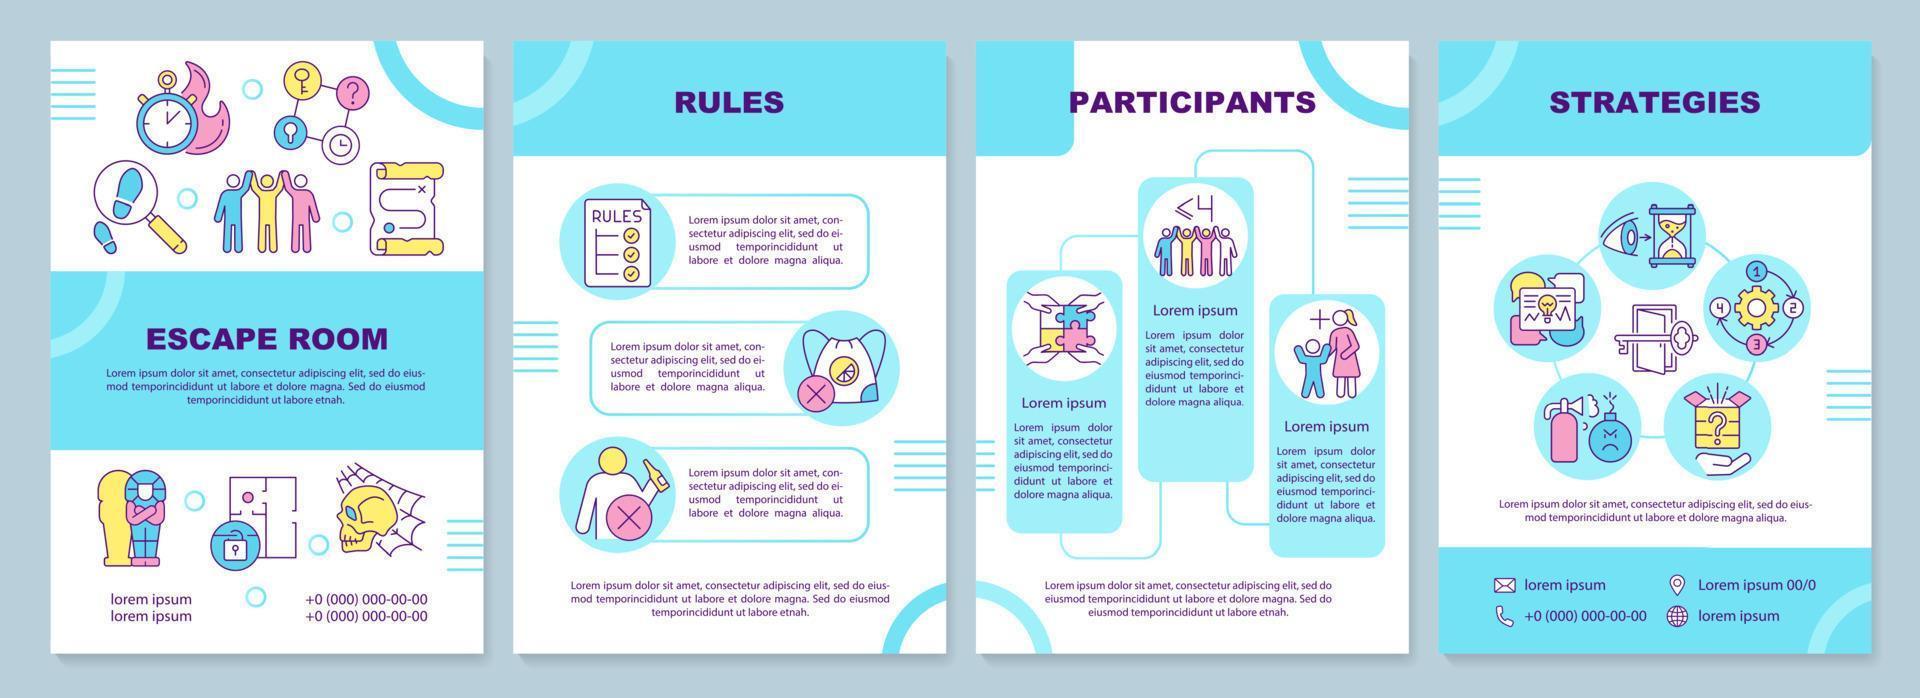 Escape room turquoise brochure template. Rules and participants. Leaflet design with linear icons. 4 vector layouts for presentation, annual reports.